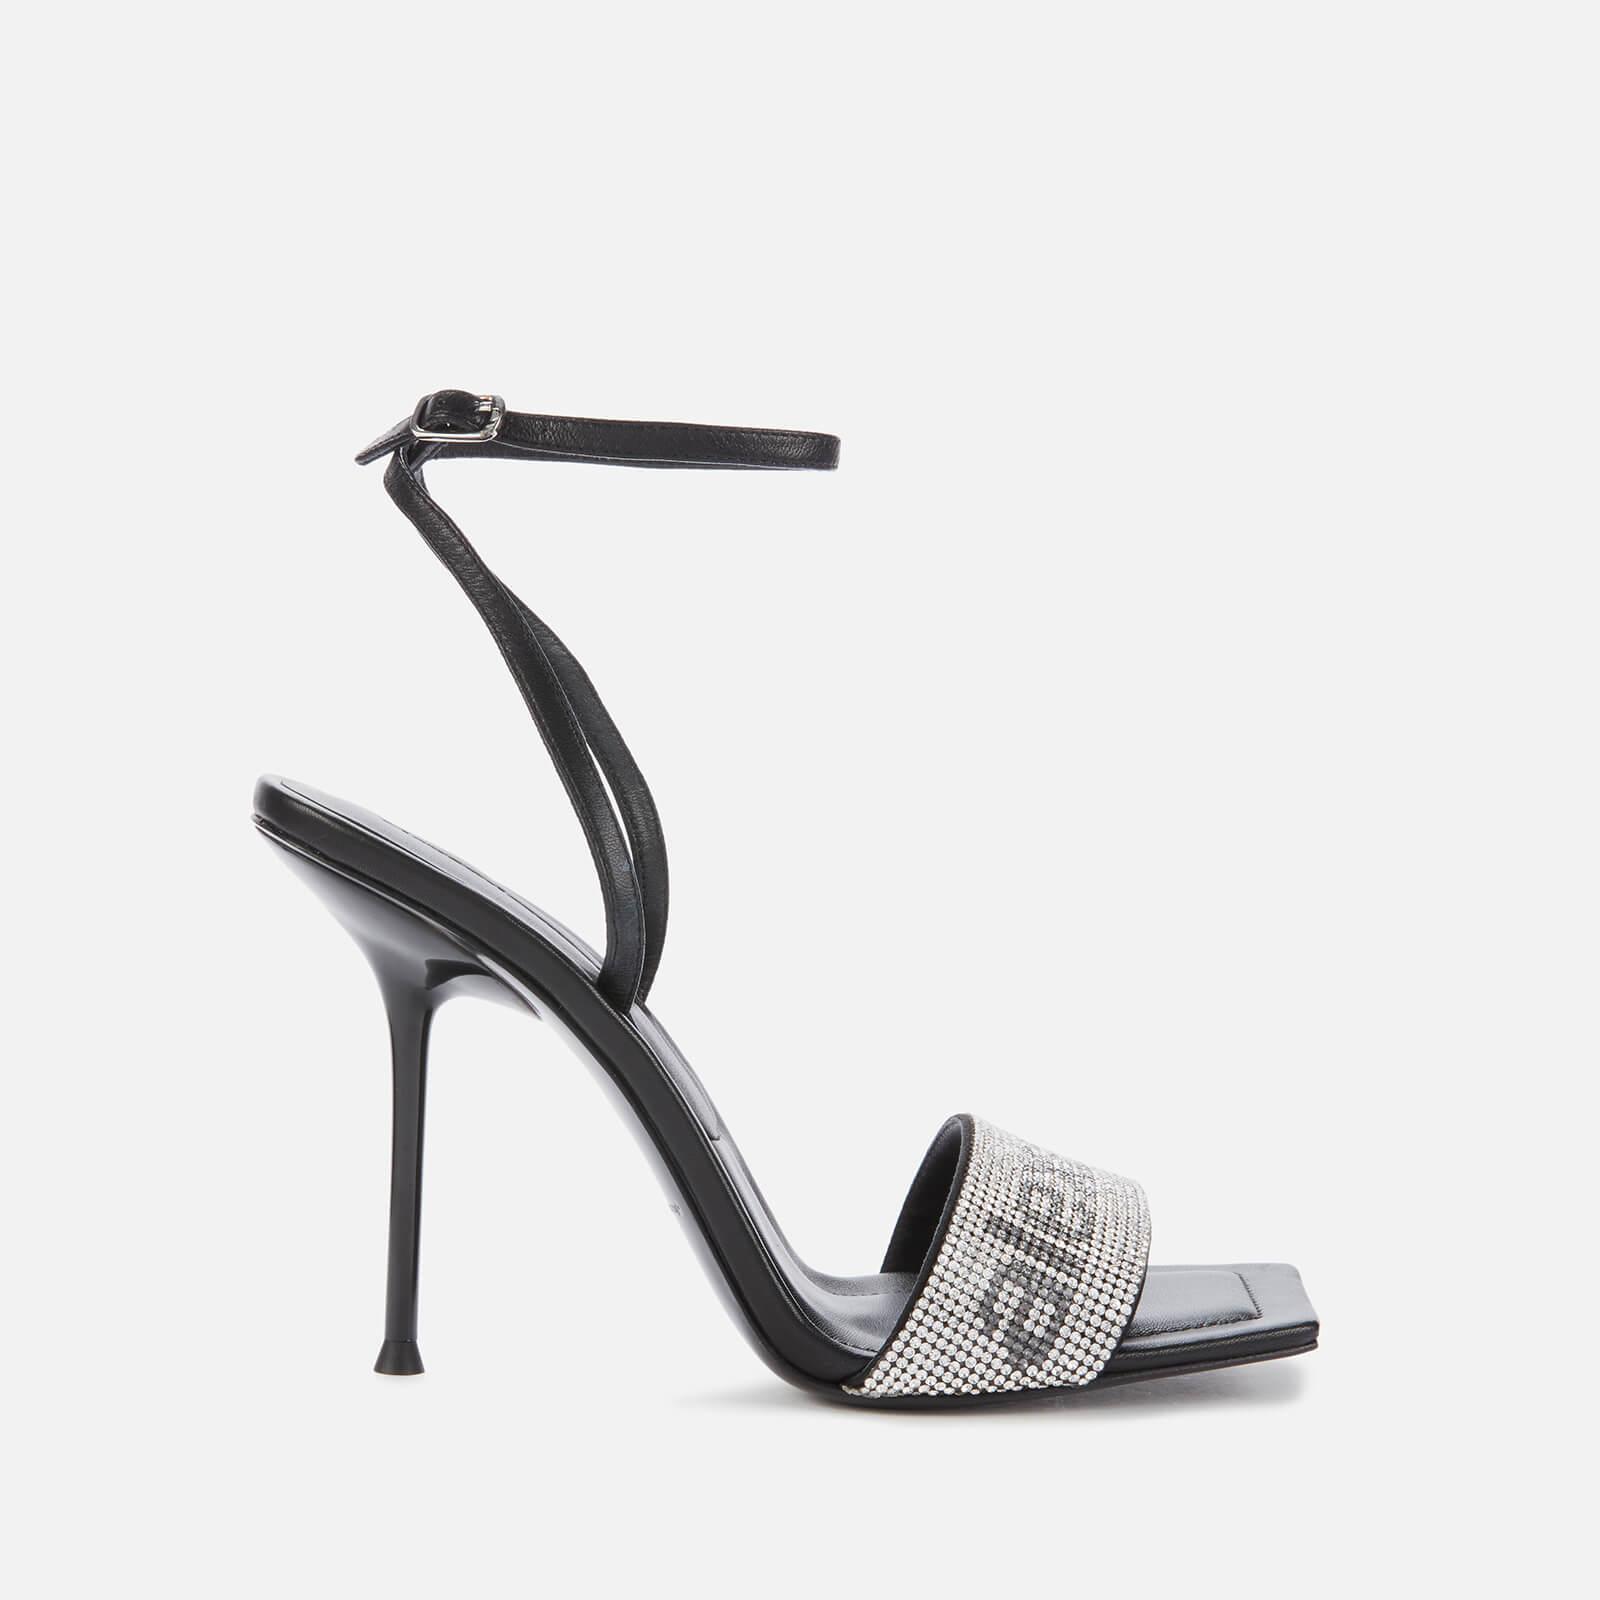 Alexander Wang Leather Julie Barely There Heeled Sandals in Black - Lyst